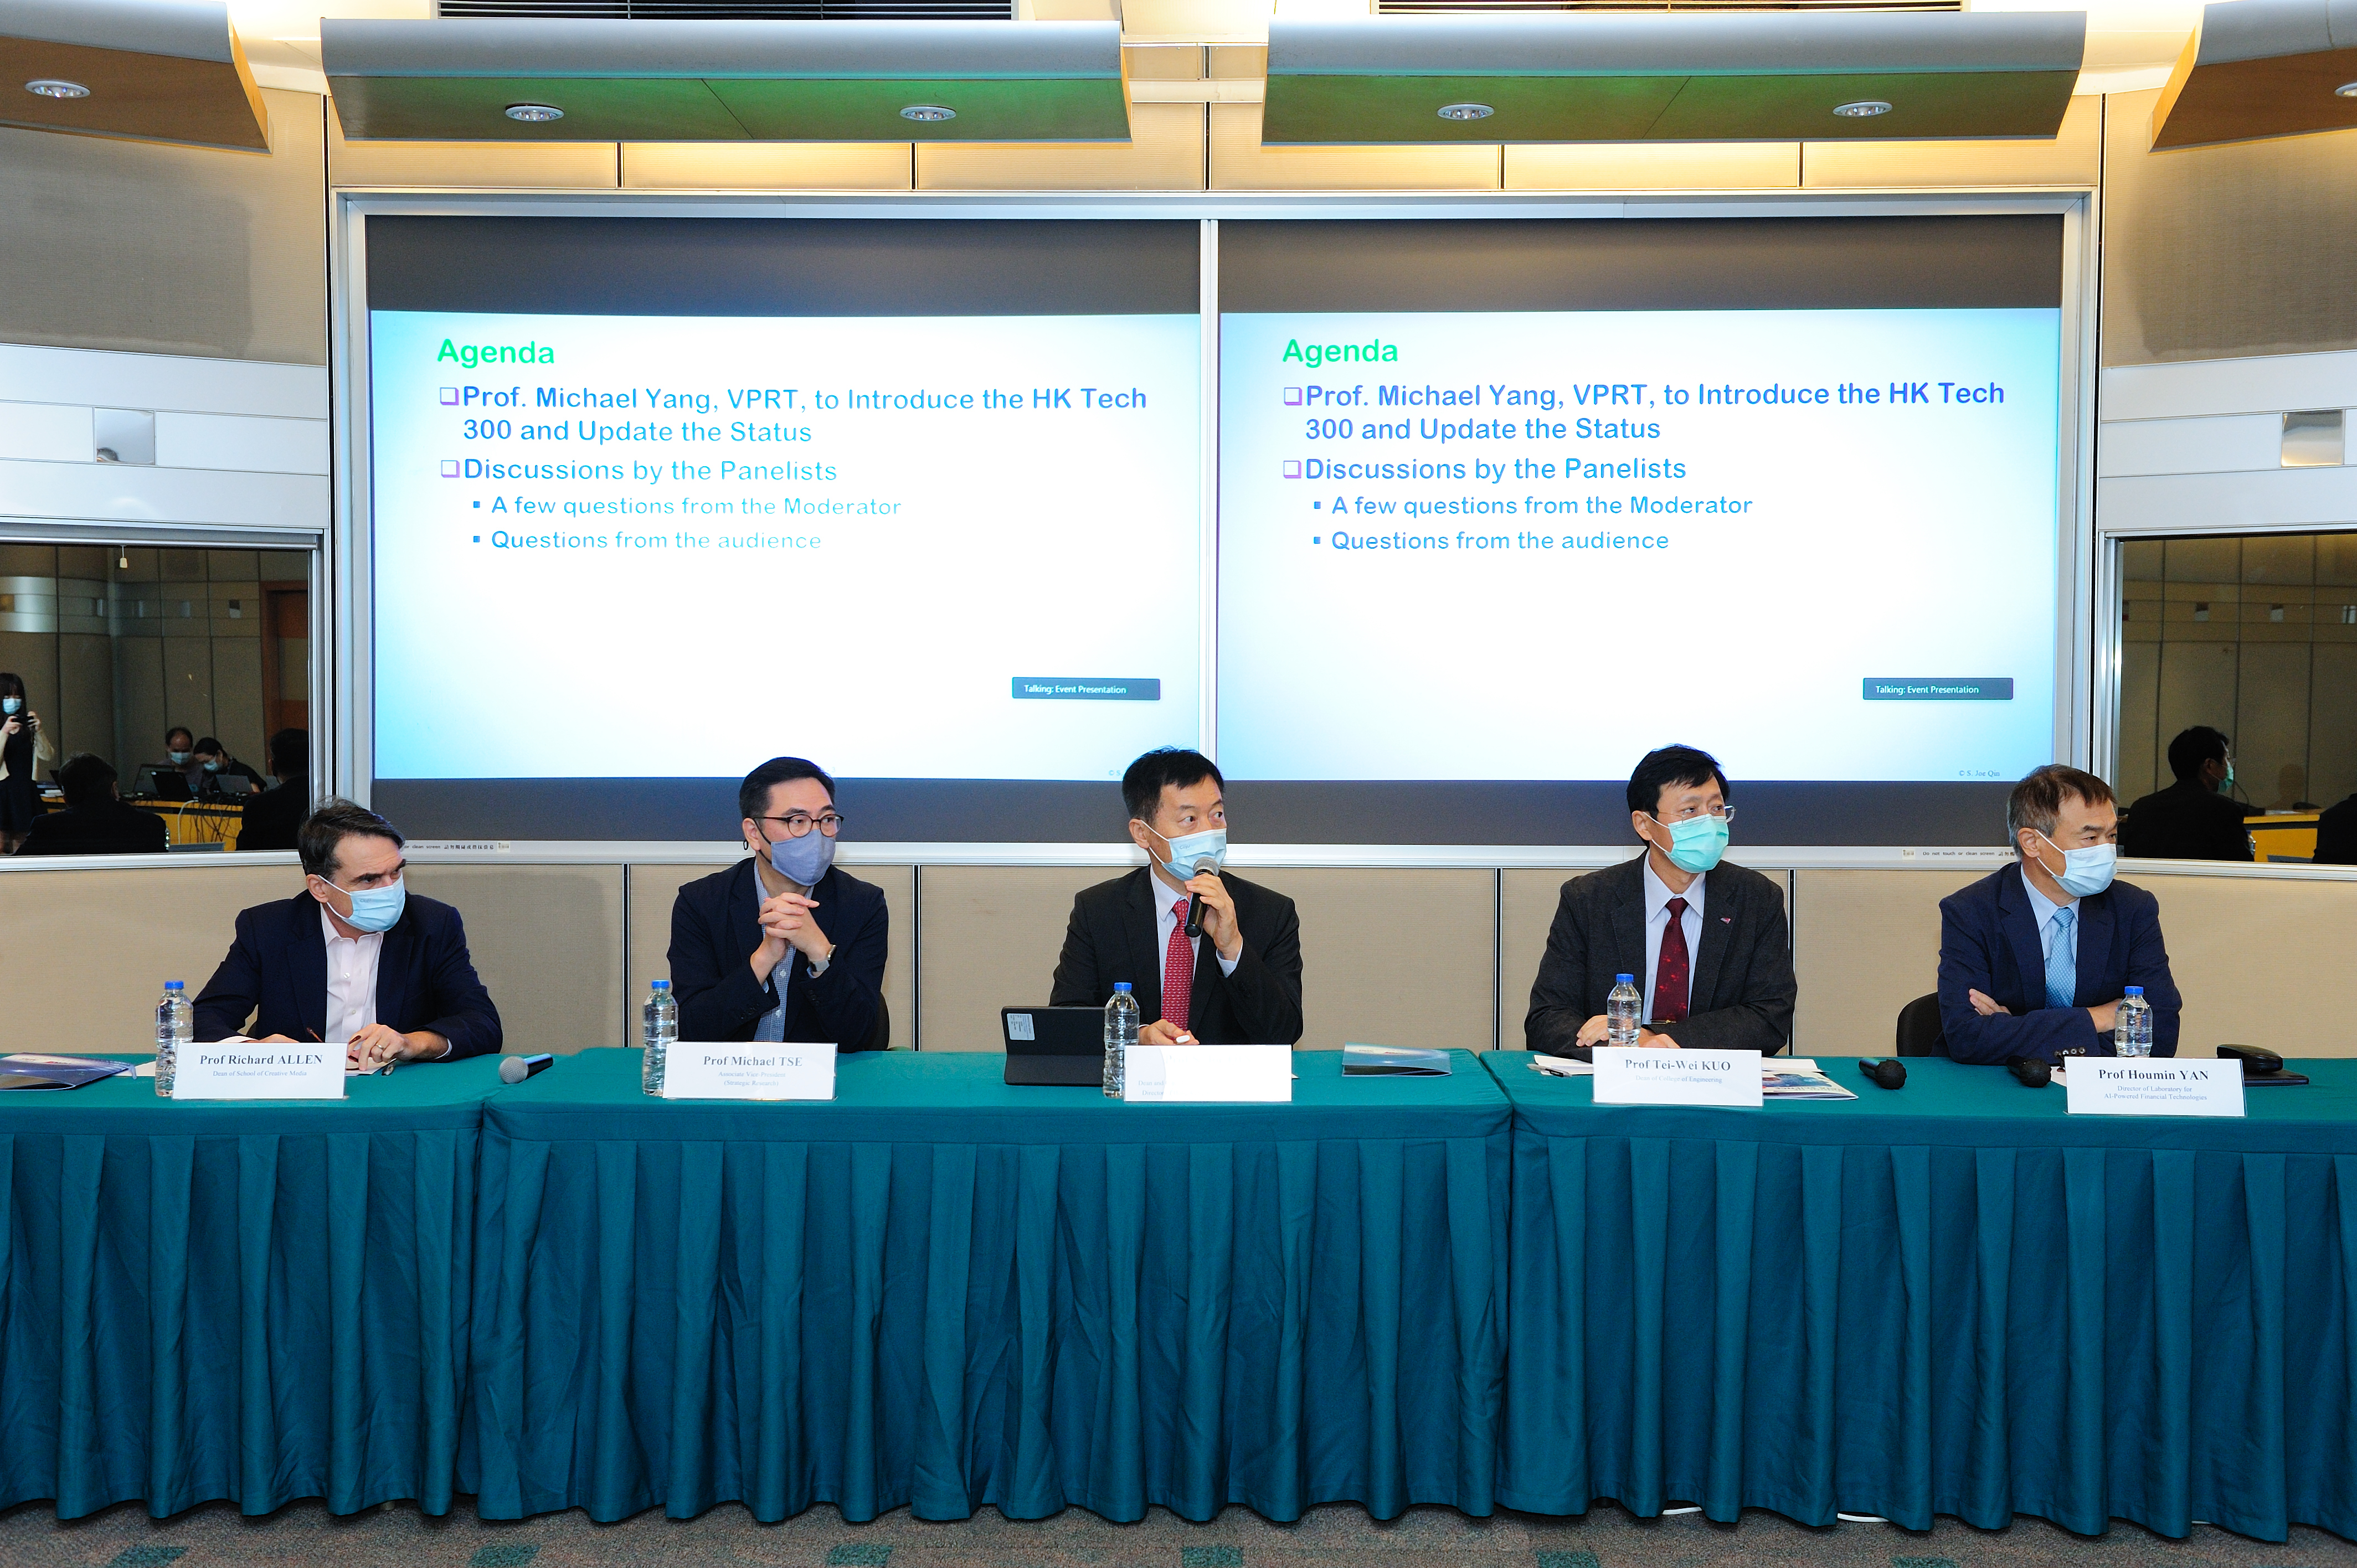 A panel discussion on “Accelerating AI and Data Science Impact Catalyzed by the HK Tech 300 Initiative” presided by CityU scholars and moderated by Prof QIN was held in the late morning.